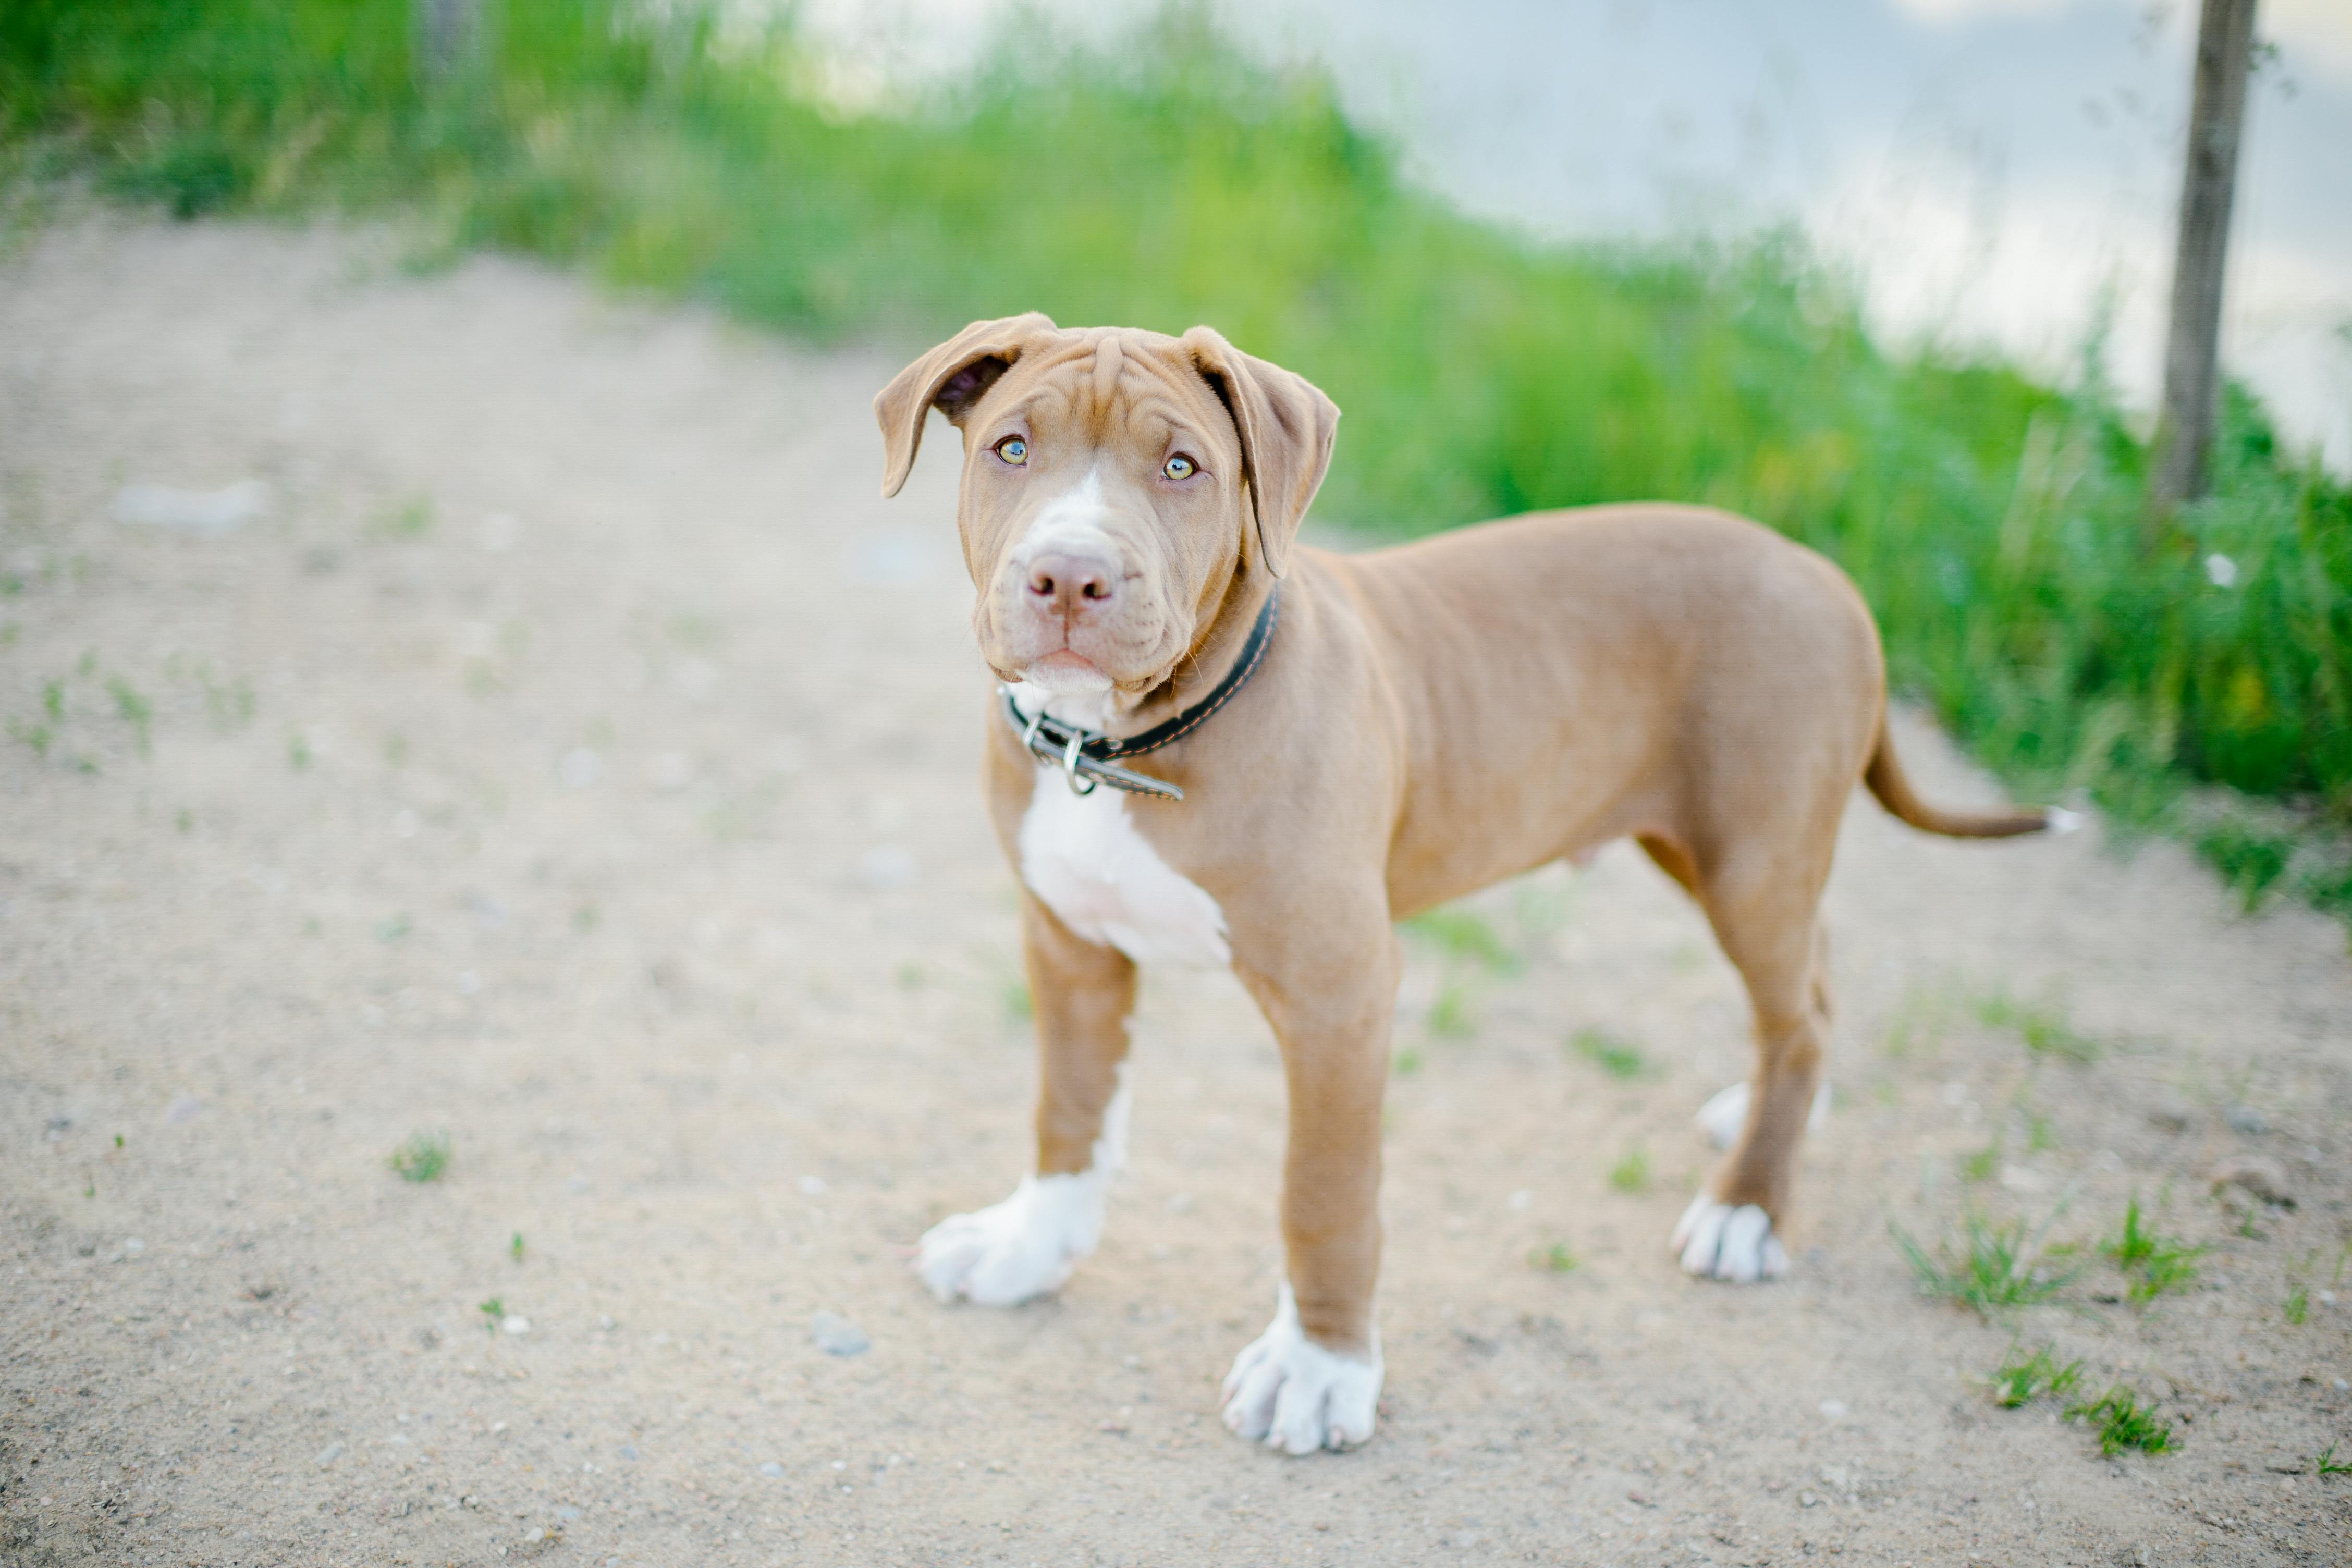 Pitbull Photos, Download The BEST Free Pitbull Stock Photos & HD Images